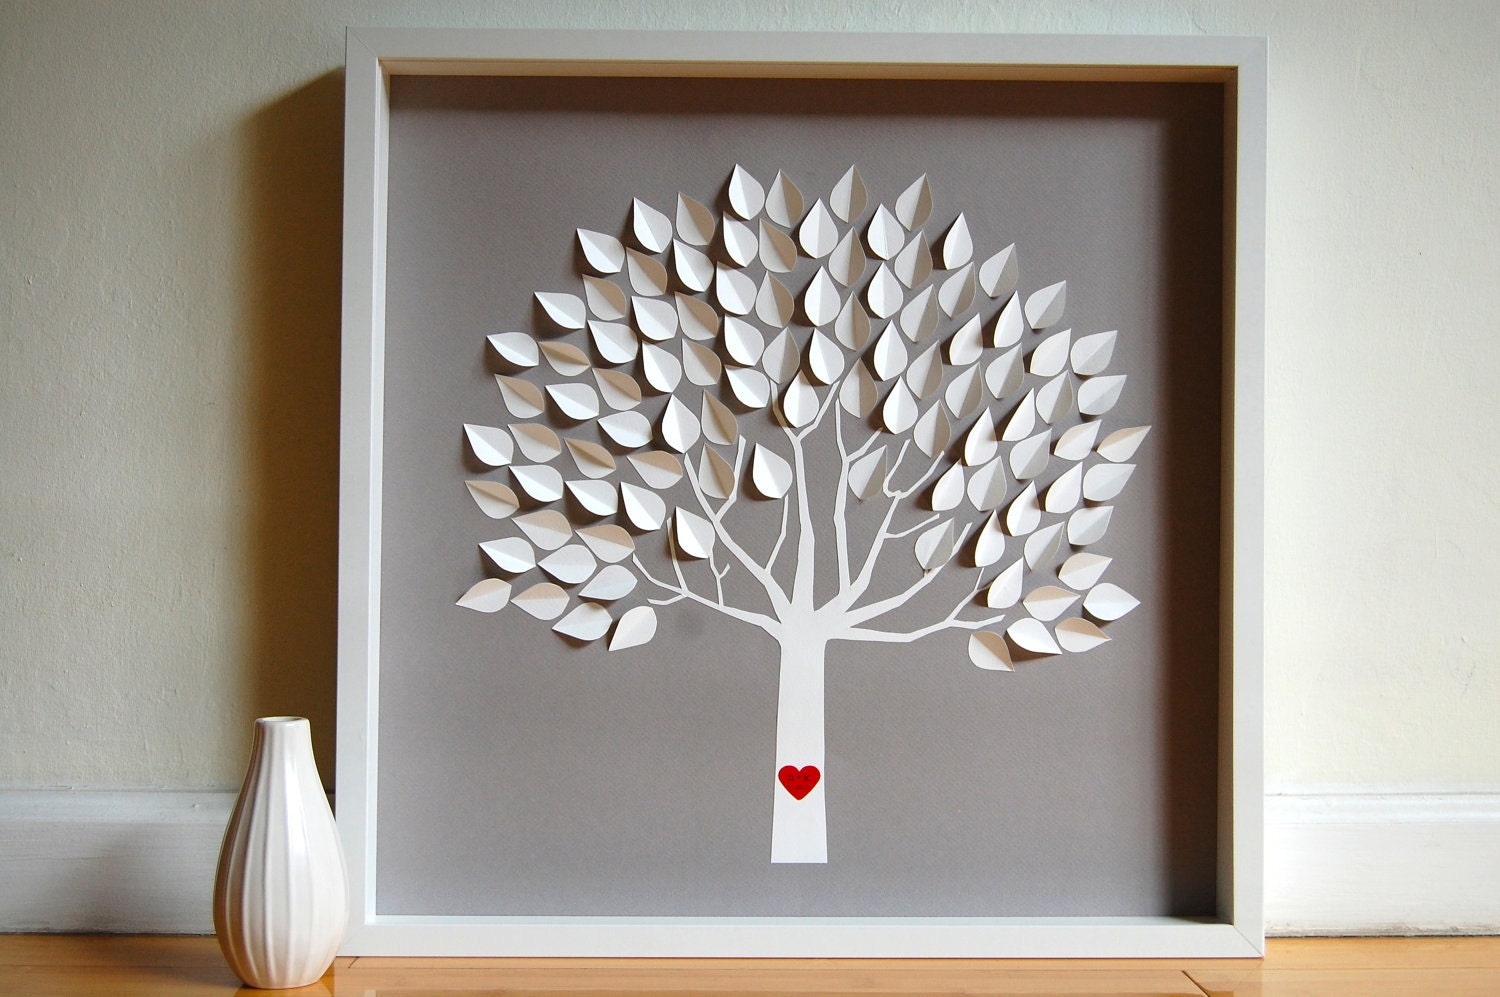 Framed personalized wedding tree with red heart on the trunk.